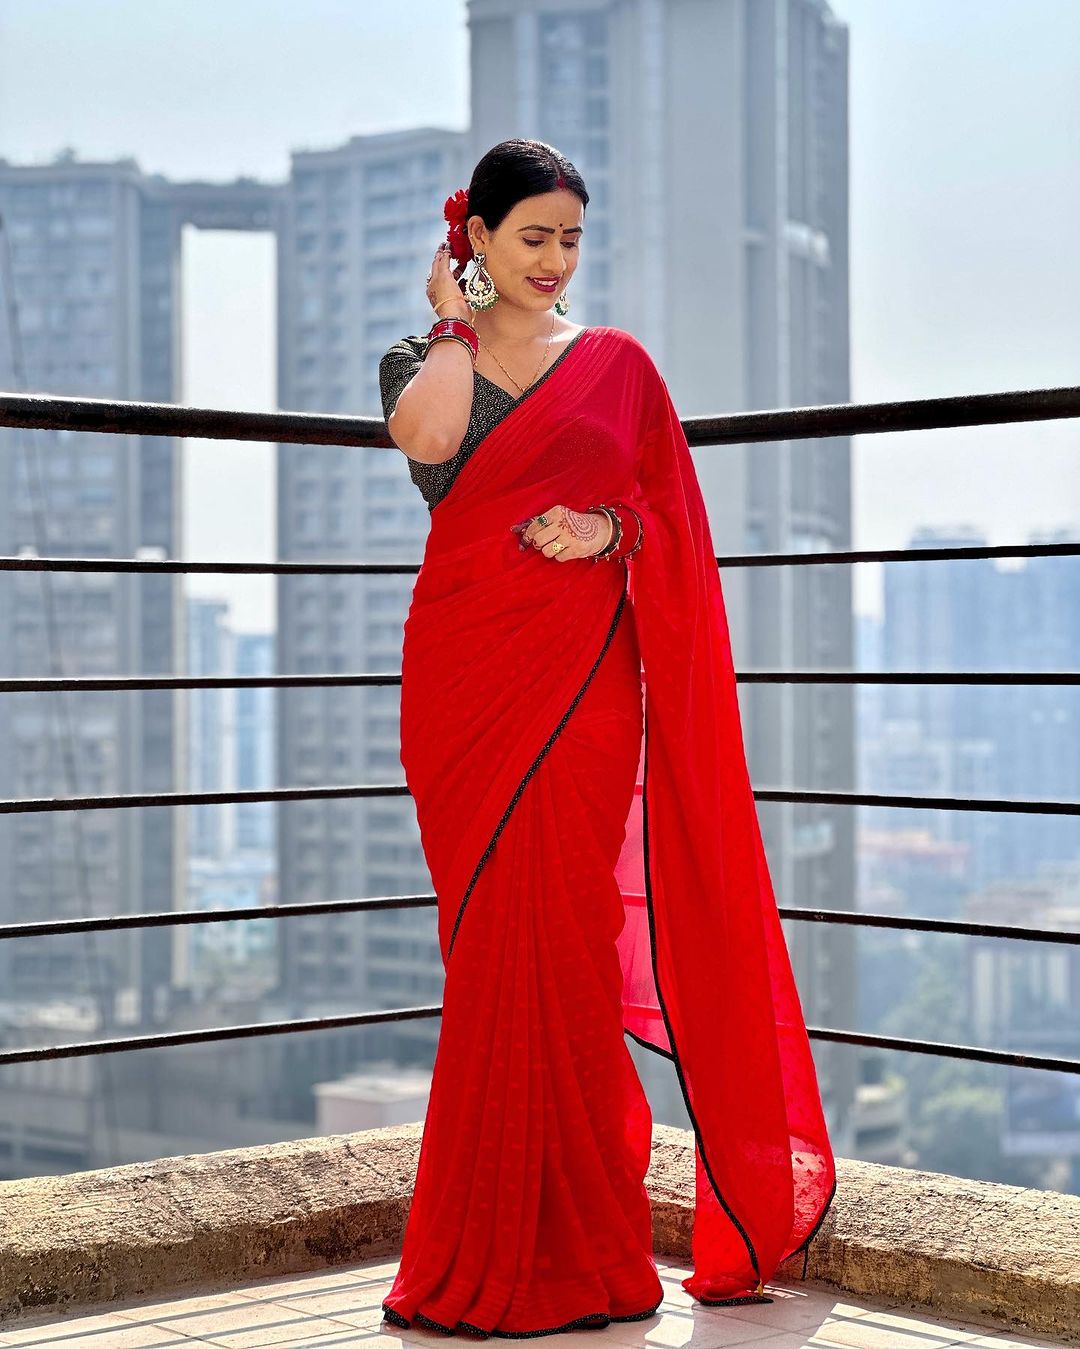 Pure Weightless Designer Saree with Blouse (ANC00116) ₹750.00₹1,500.00 Pure Weightless Designer Saree with Blouse (ANC00116)